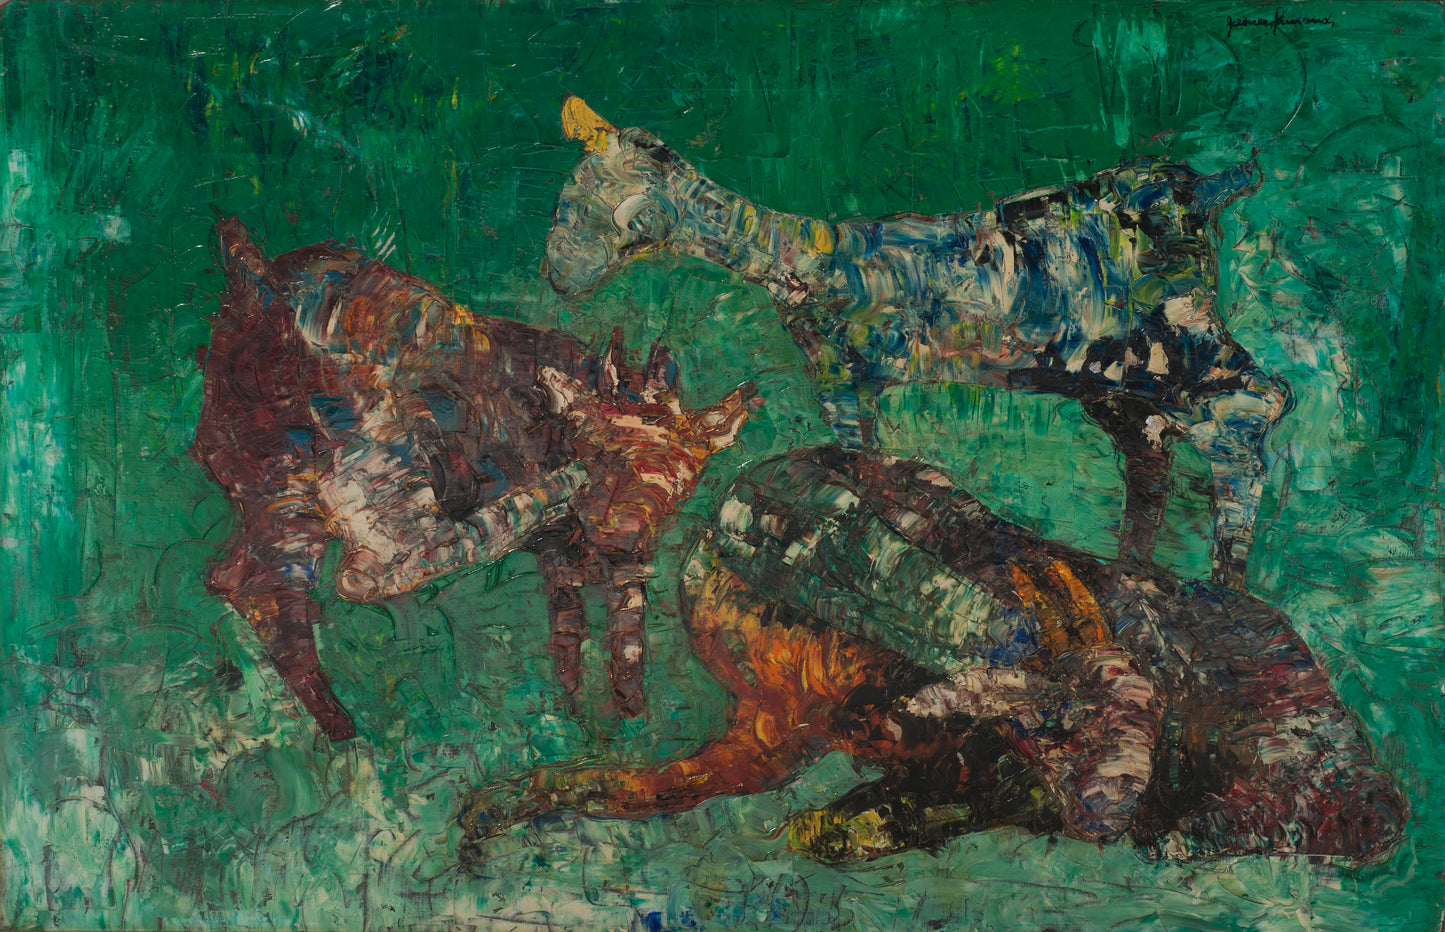 Gesner Armand (1936-2008) 39 ¾"  x 29 ¾" Goats Fight 1977 Oil on Board Painting #24-3-96GSN-Fondation Marie & Georges S. Nader